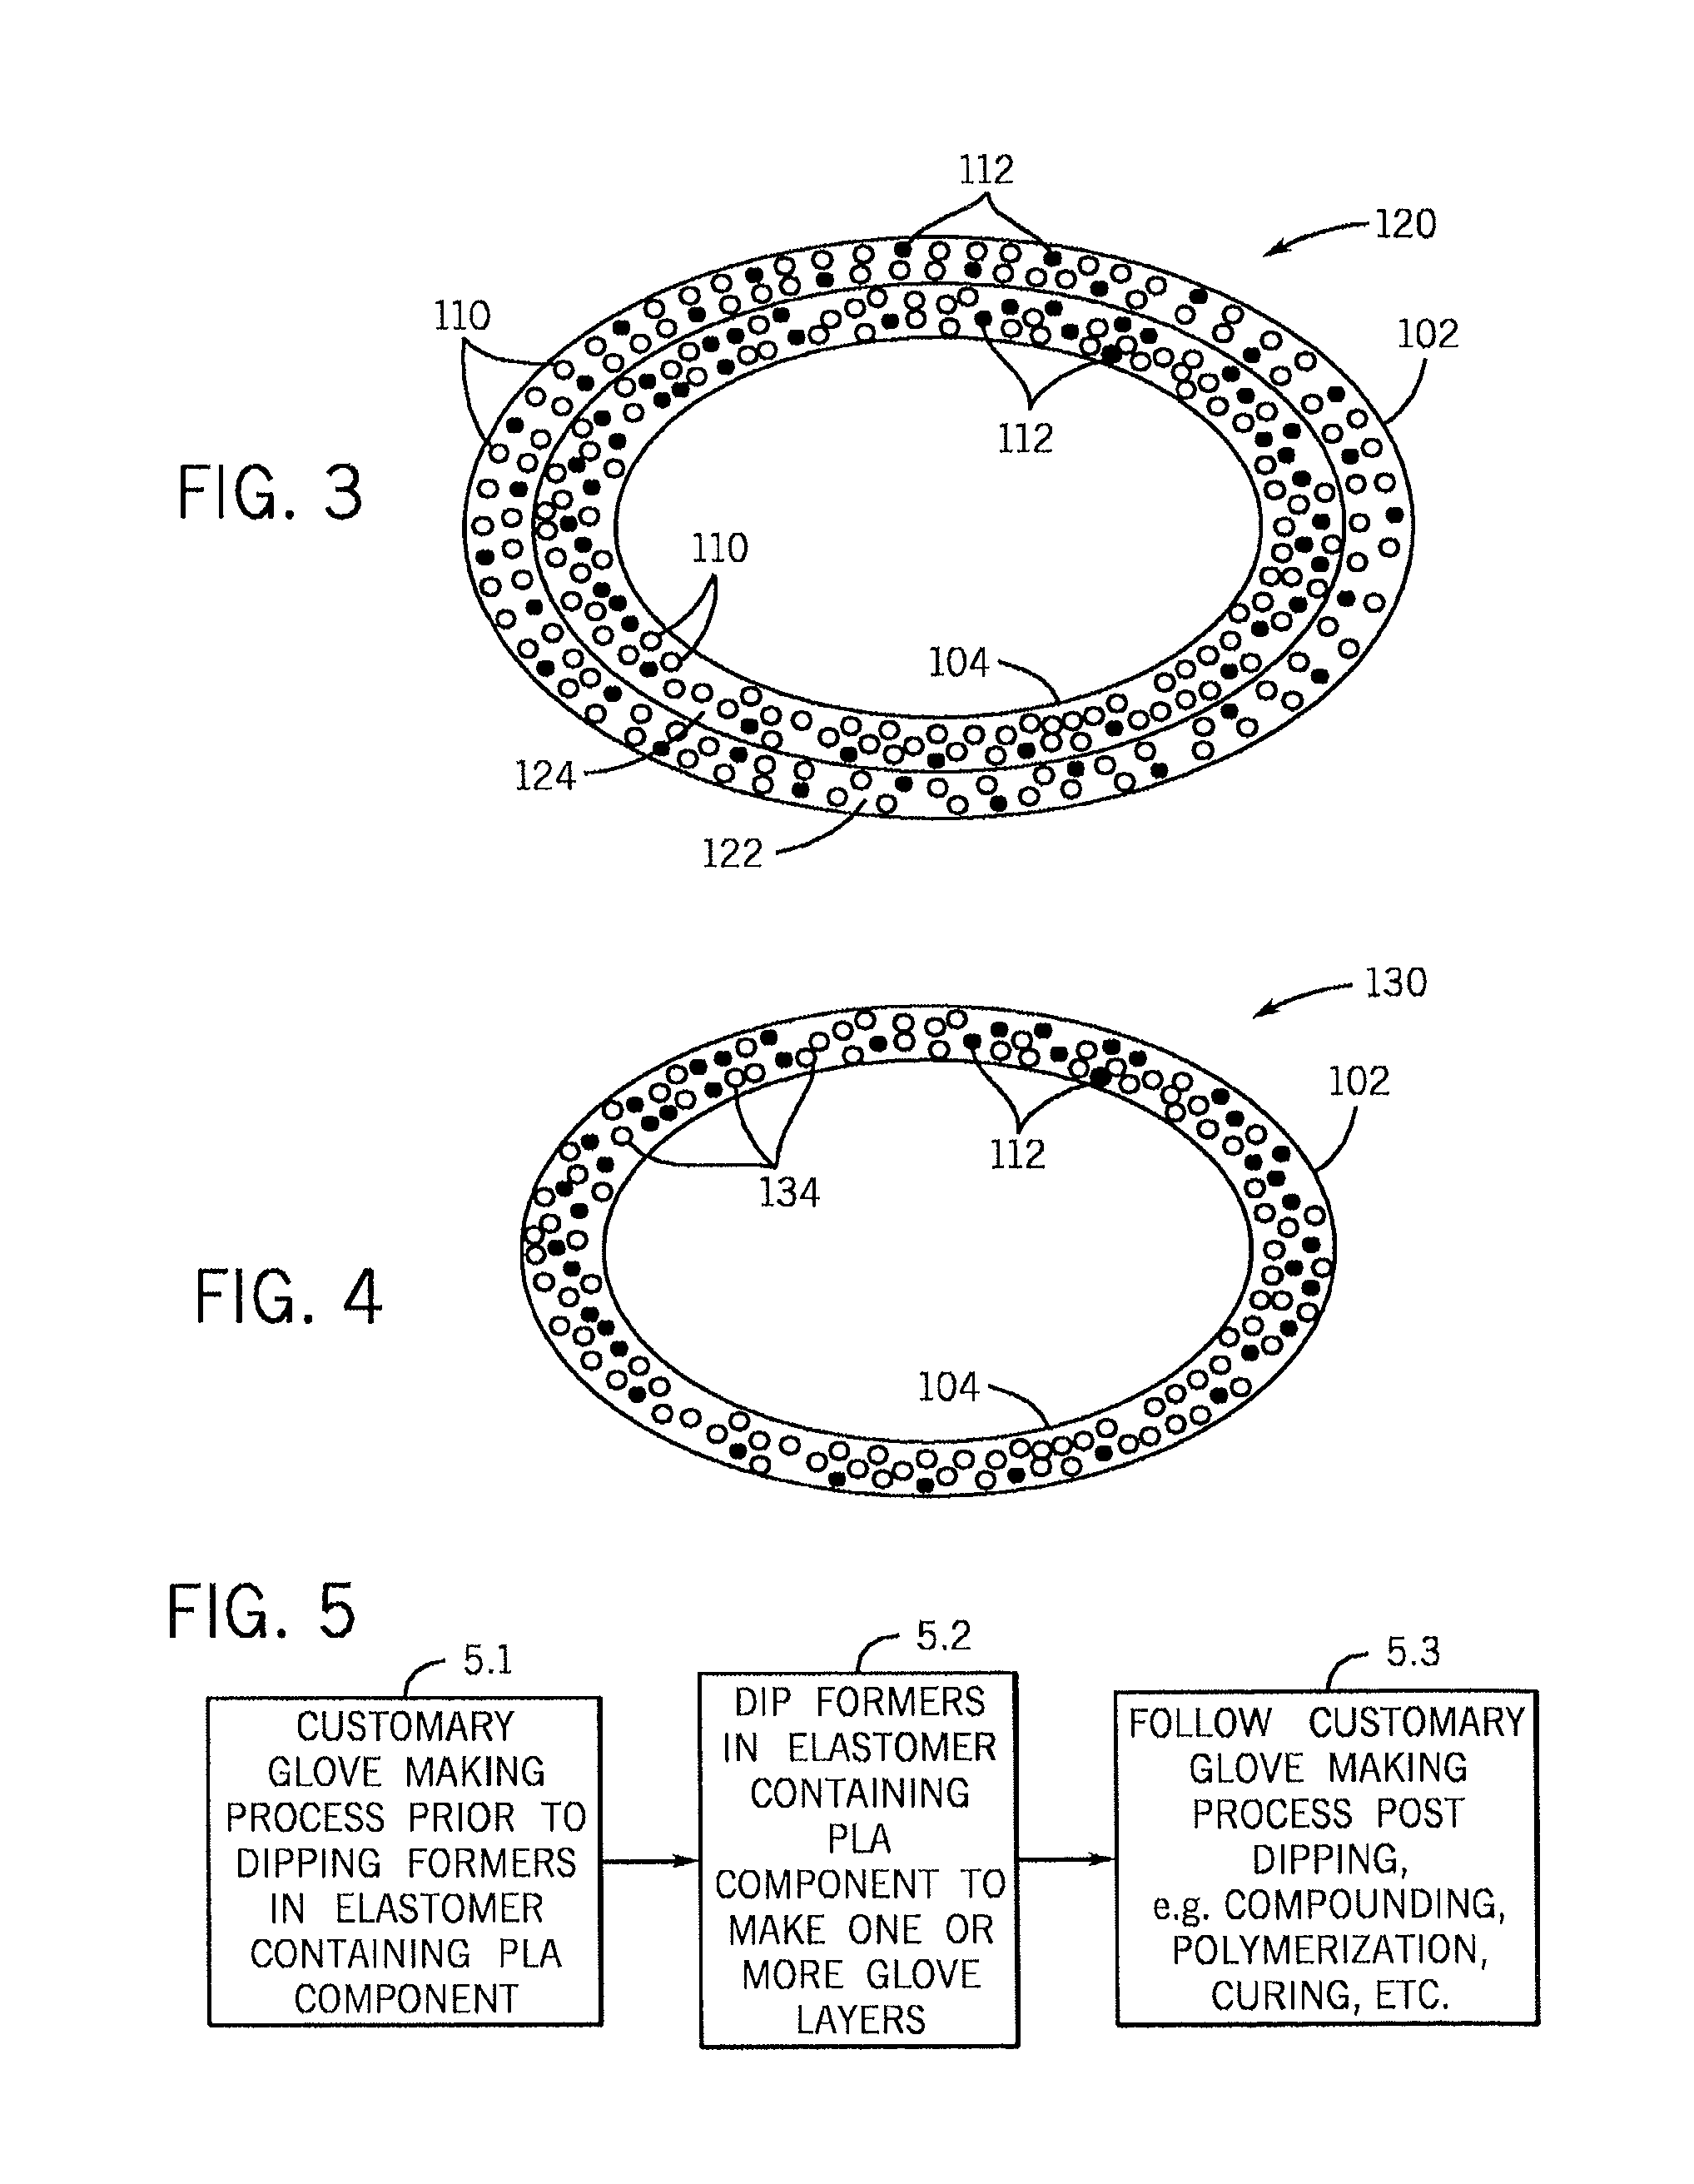 Polylactic acid gloves and methods of manufacturing same